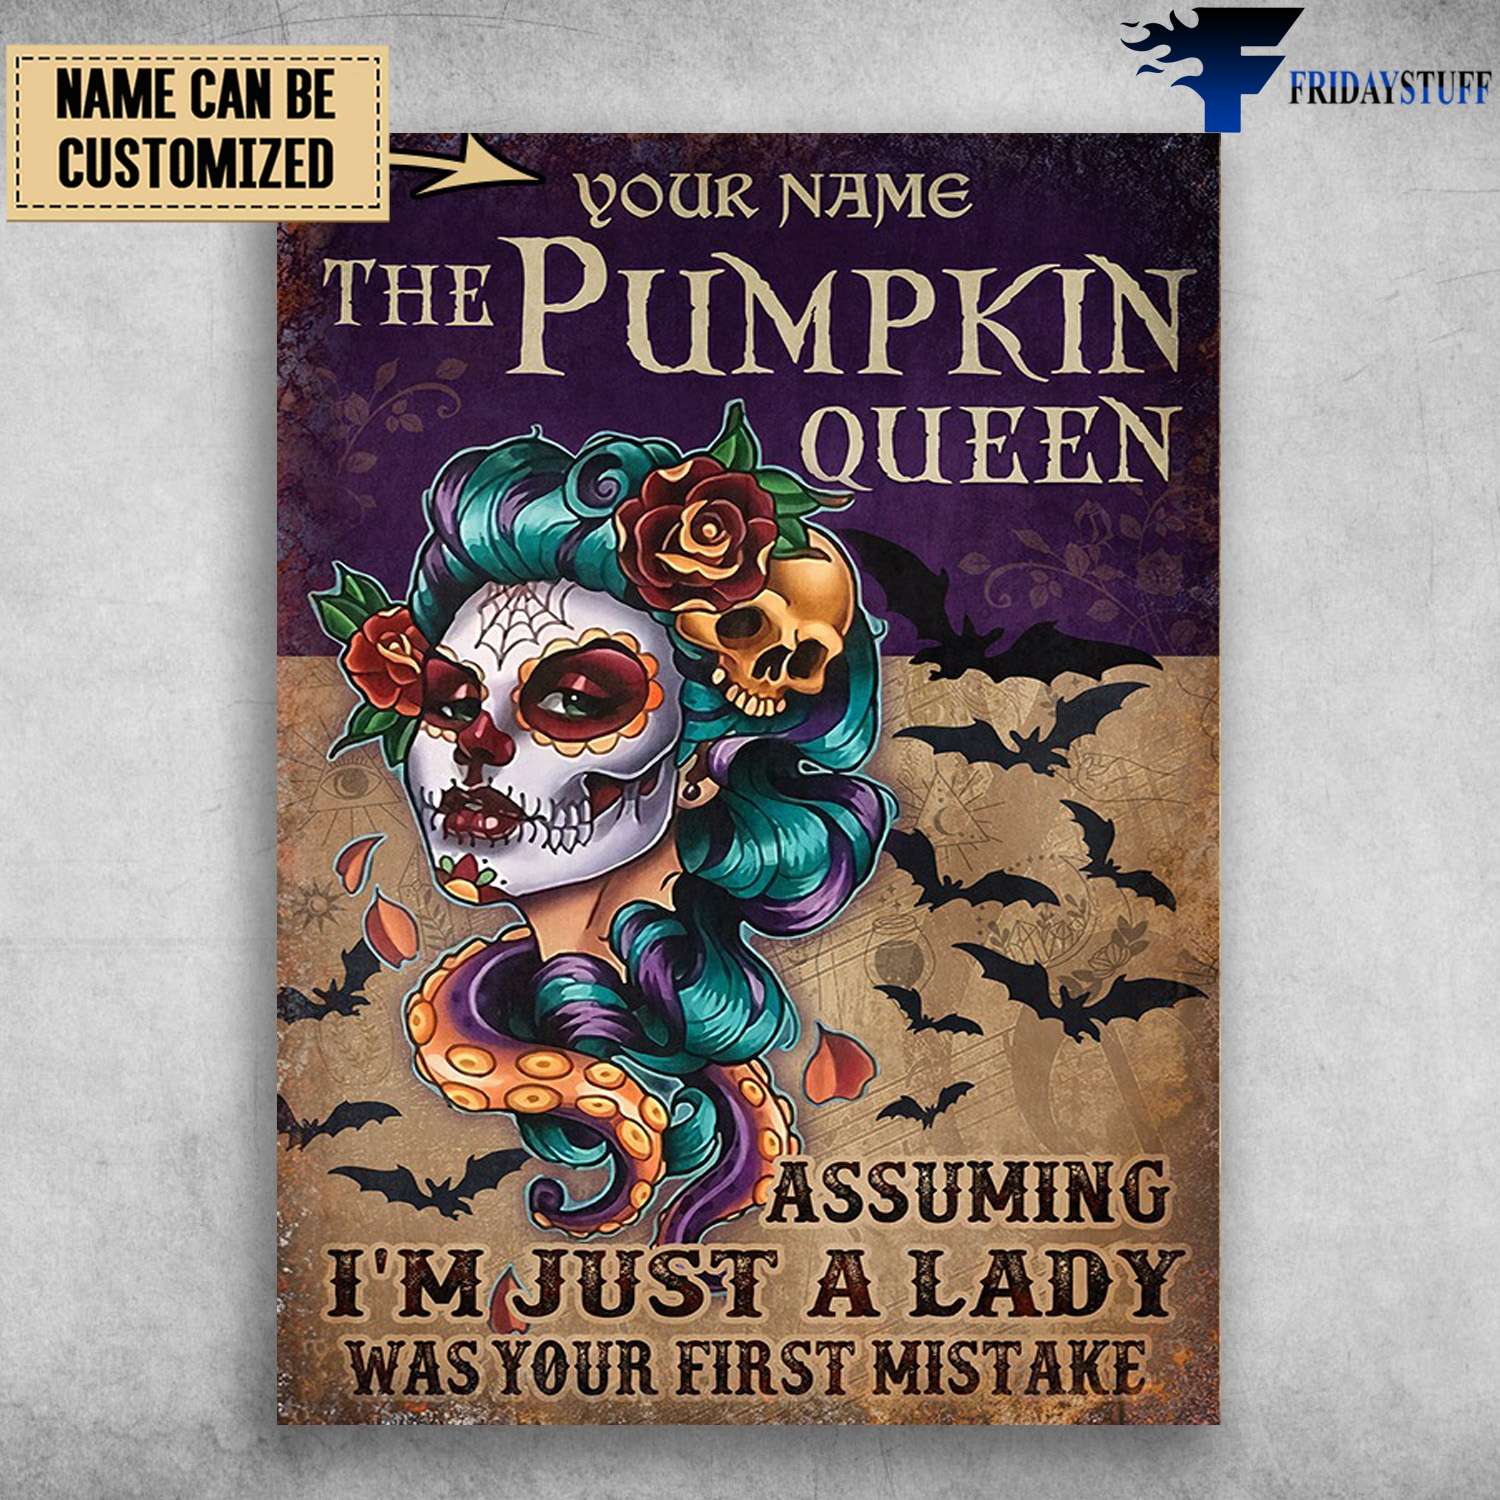 Tattoo Girl, Halloween Poster, The Pumkin Queen, Assuming I'm Just A Lady, Was Your First Mistake